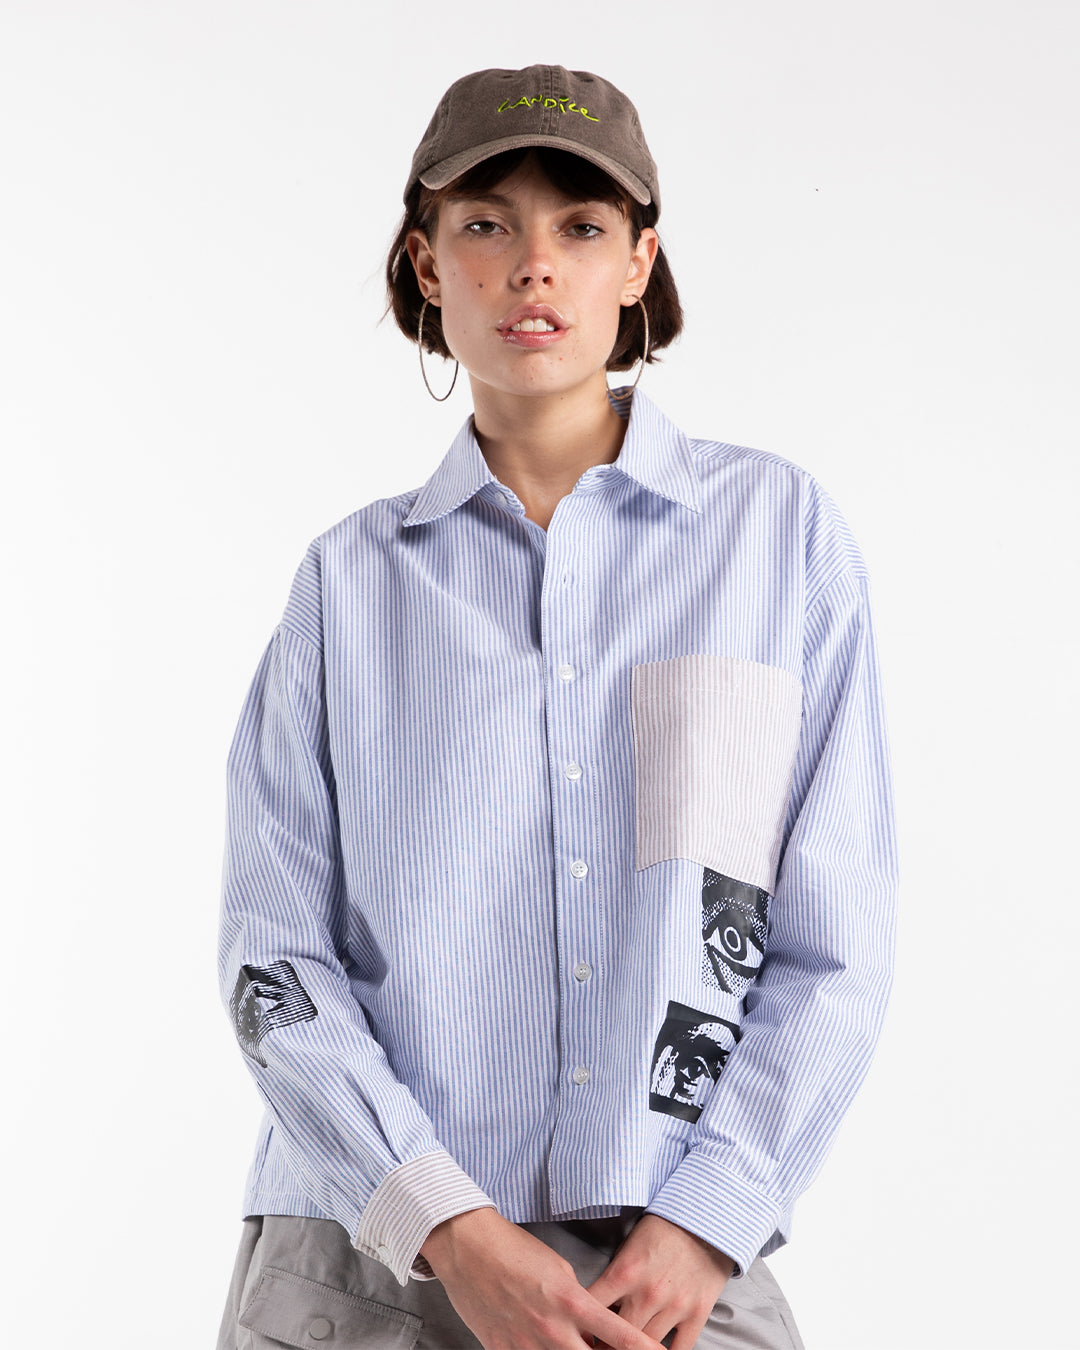 candice-oxford-shirt-outlook-hat